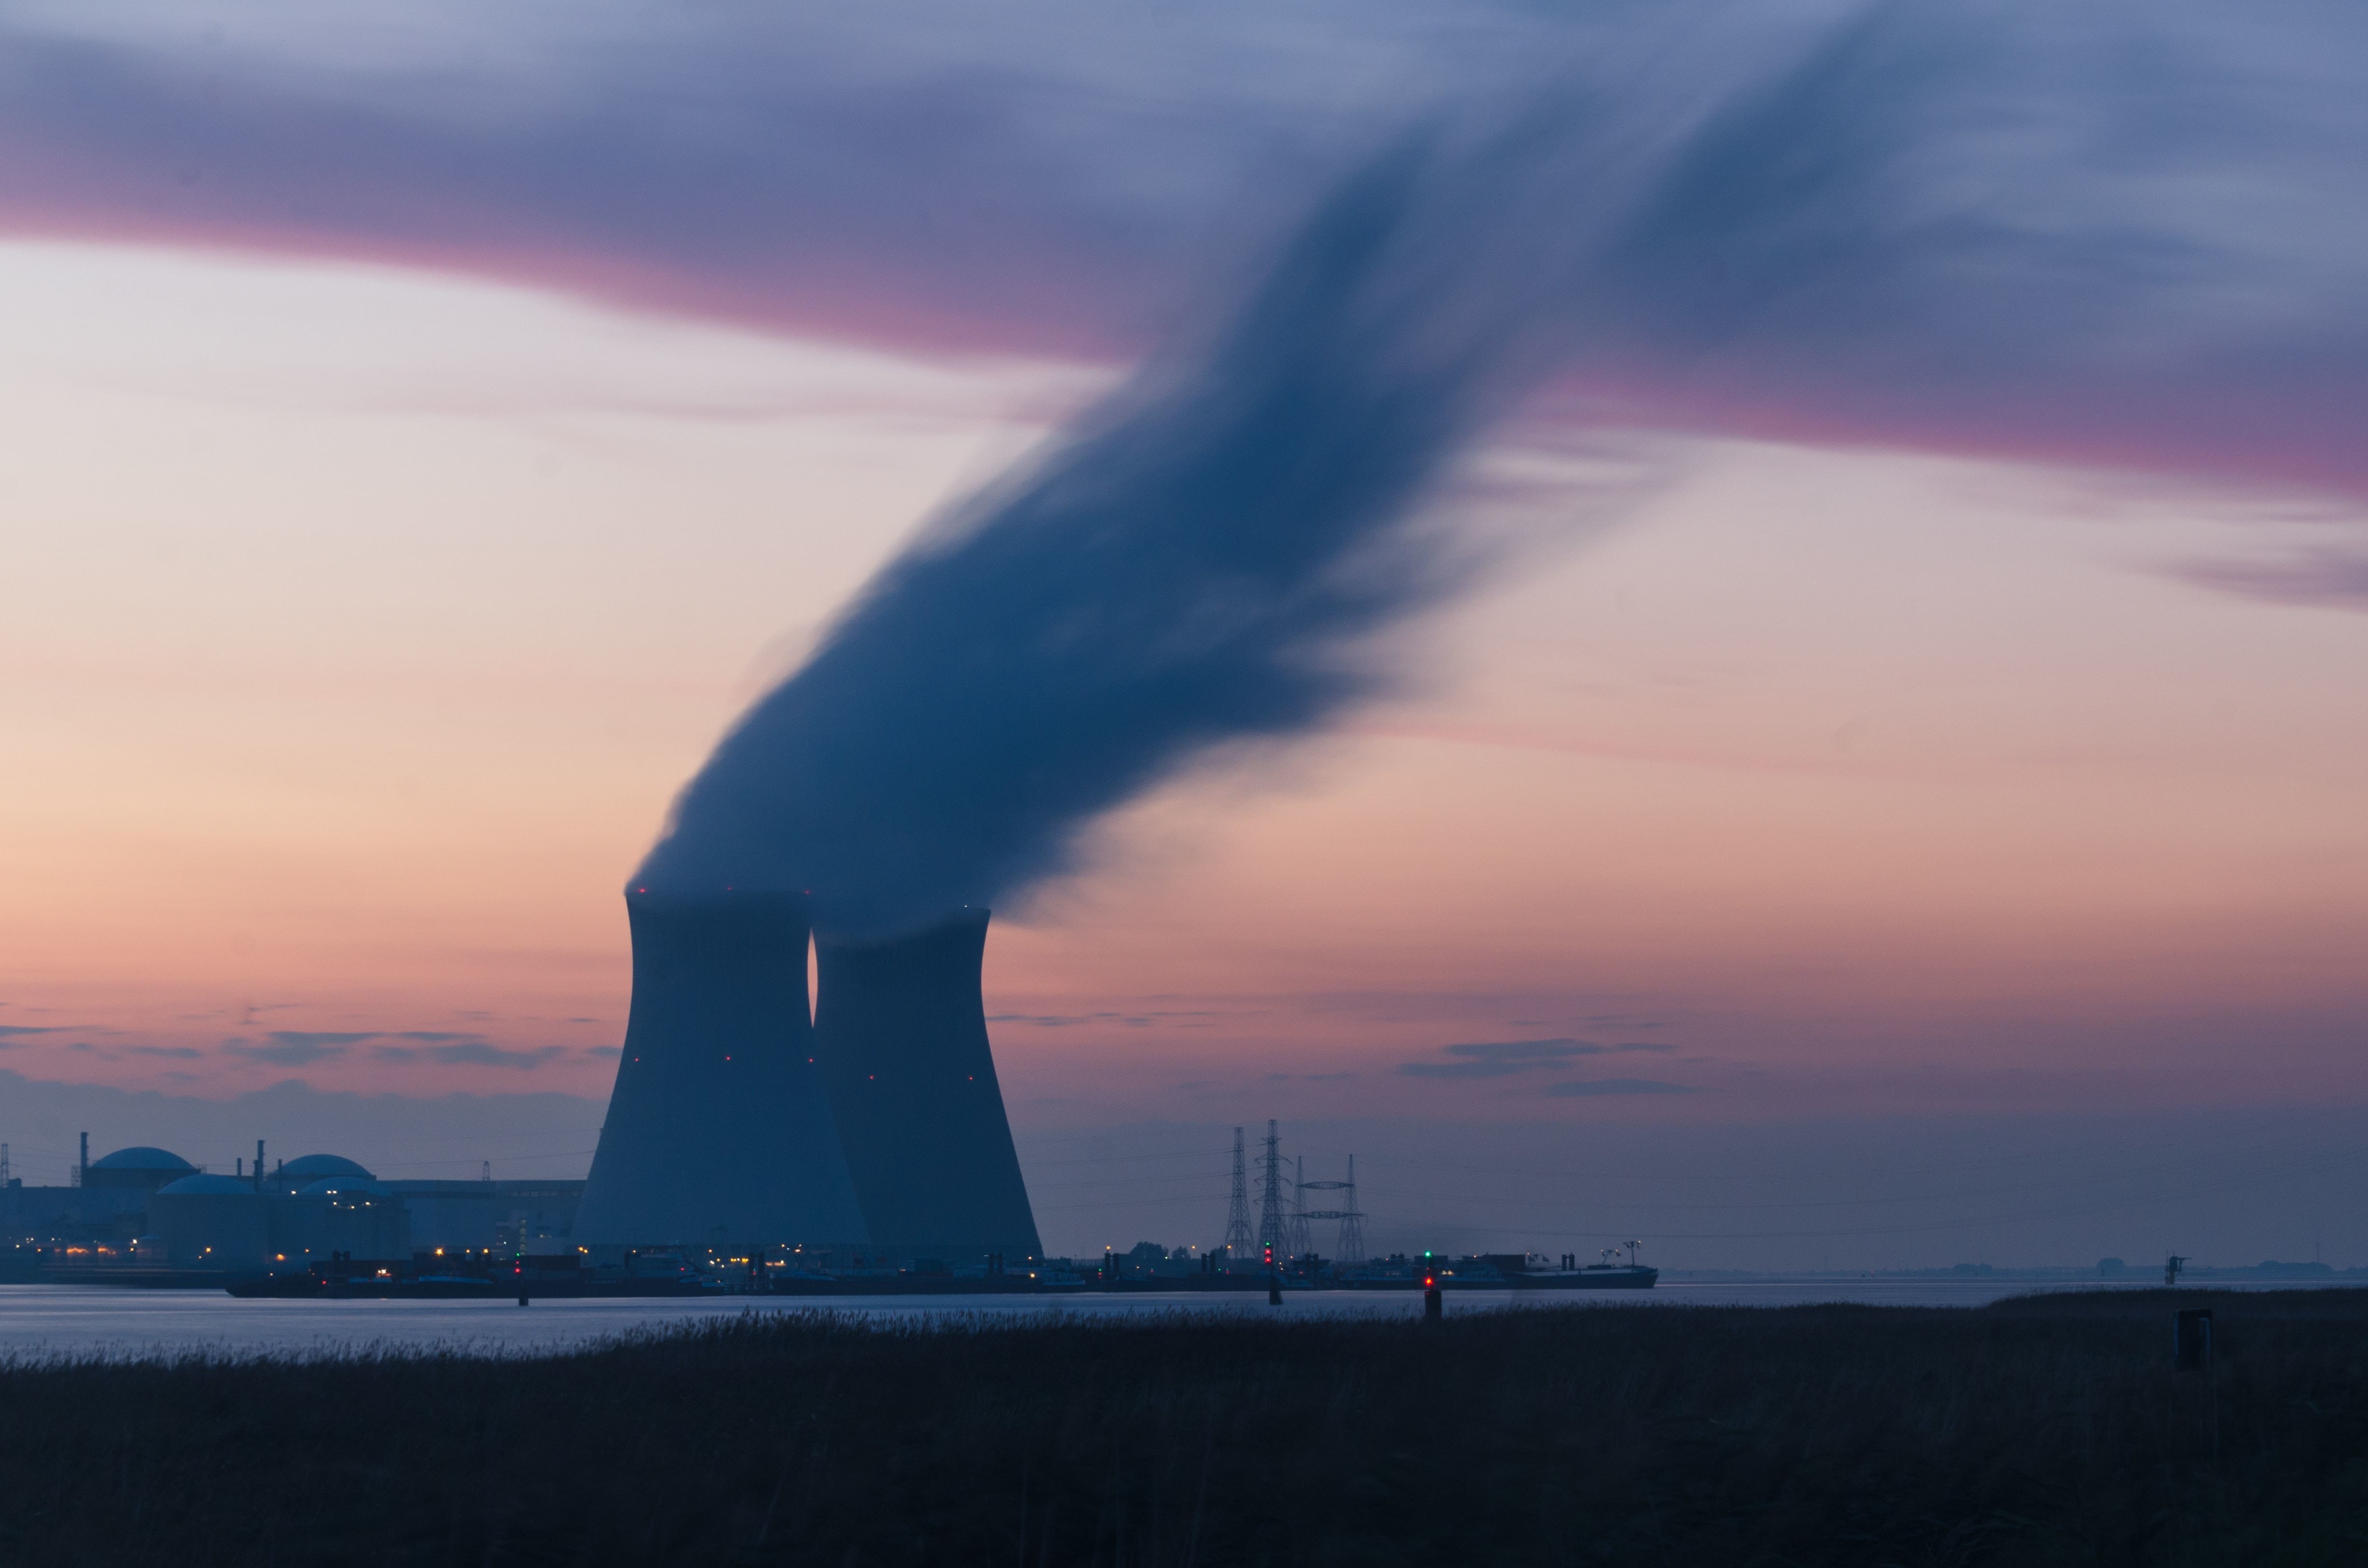 Nuclear powerplant in Belgium. Nuclear energy's contribution to global power generation is expected to be about 8.5% by 2050.